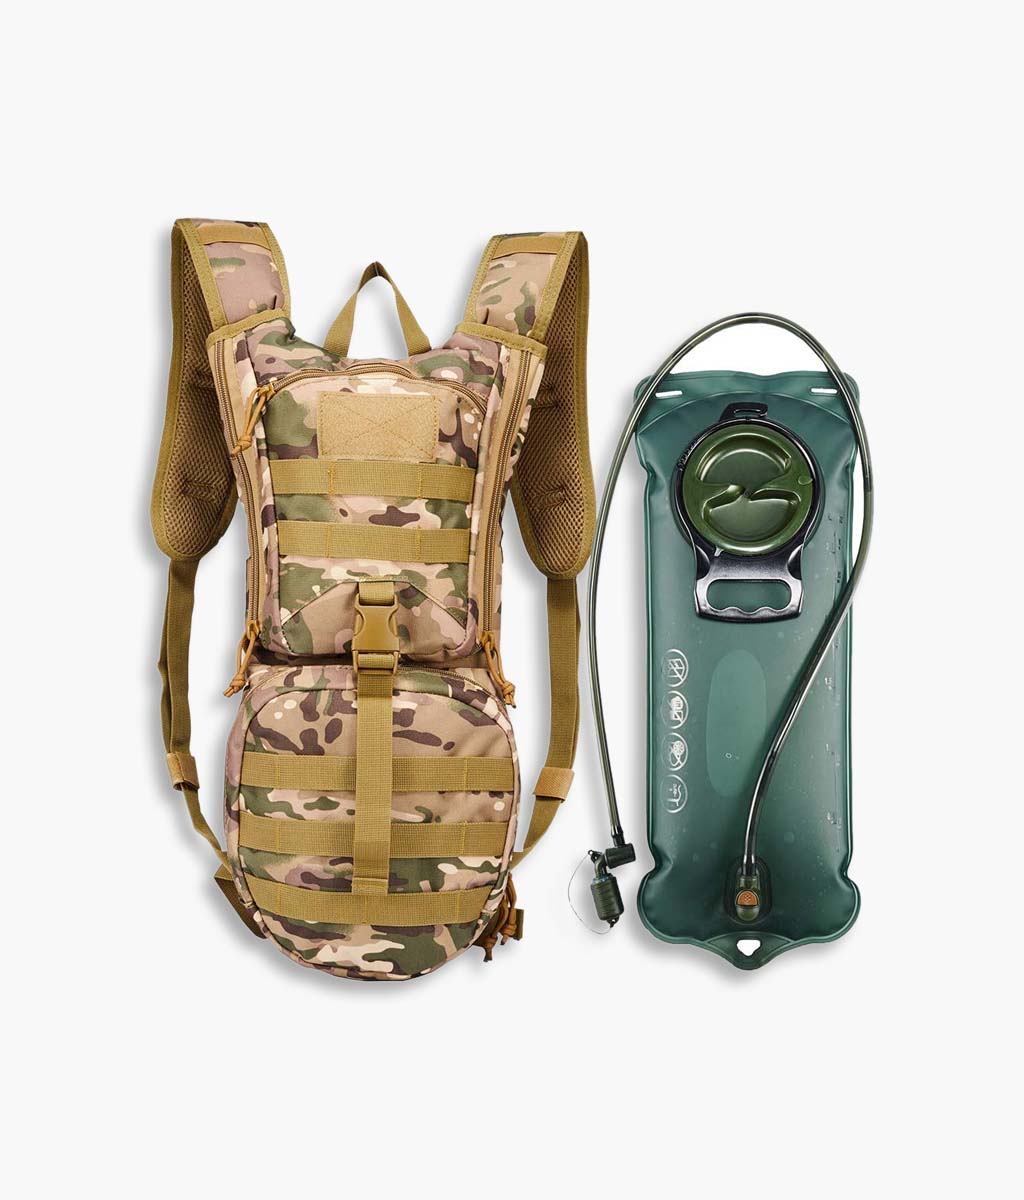 Tactical Hydration Pack with TPU Water Bladder